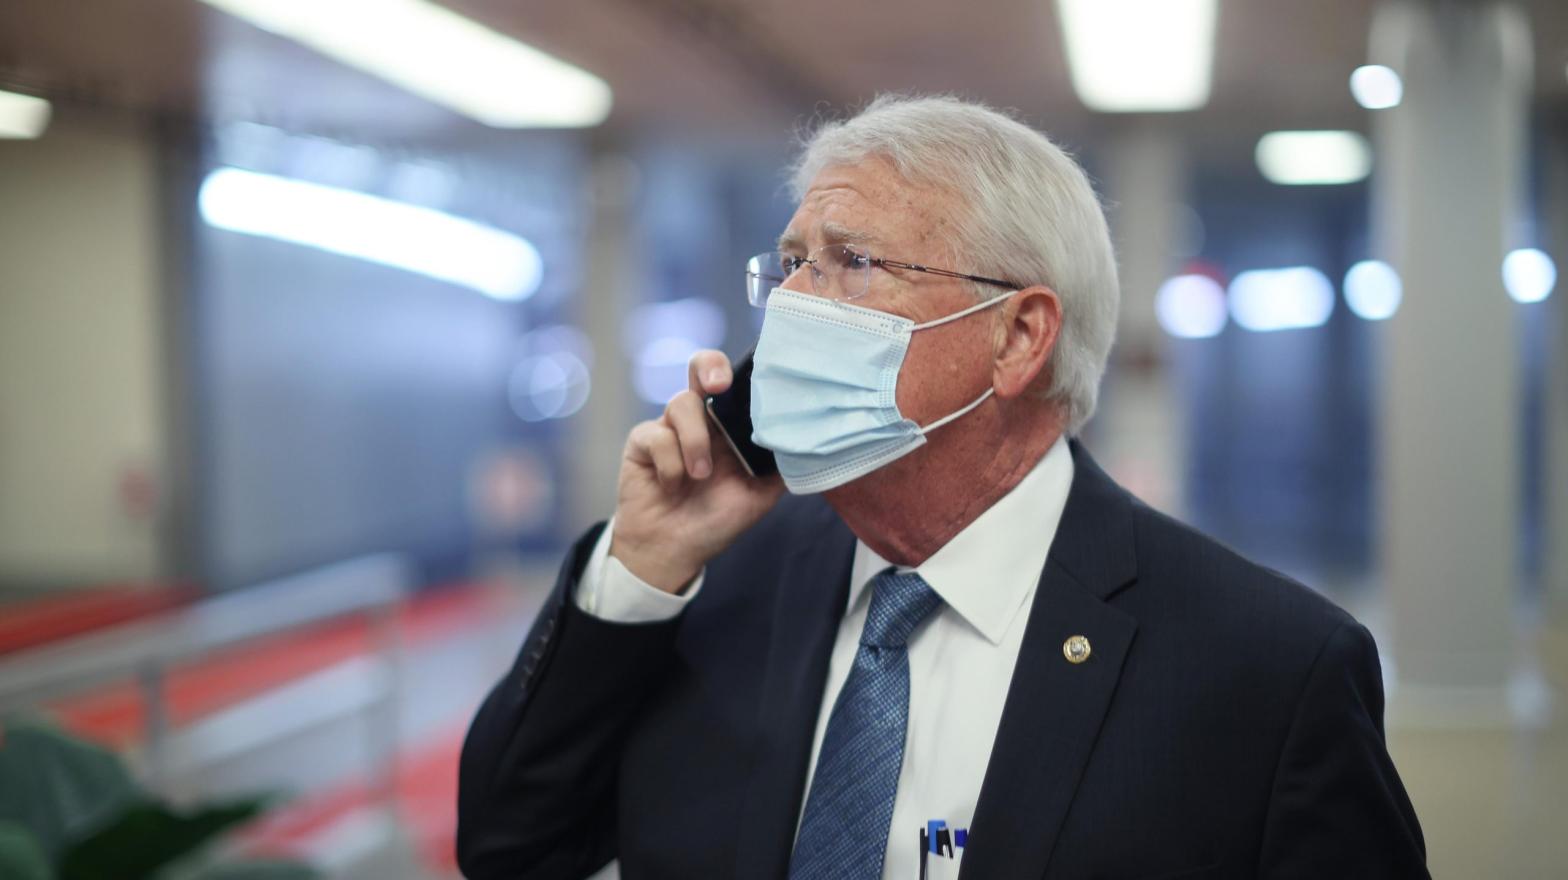 Sen. Roger Wicker (R-MS) arrives at the U.S. Capitol on February 11, 2021 in Washington, DC.  (Photo: Chip Somodevilla, Getty Images)